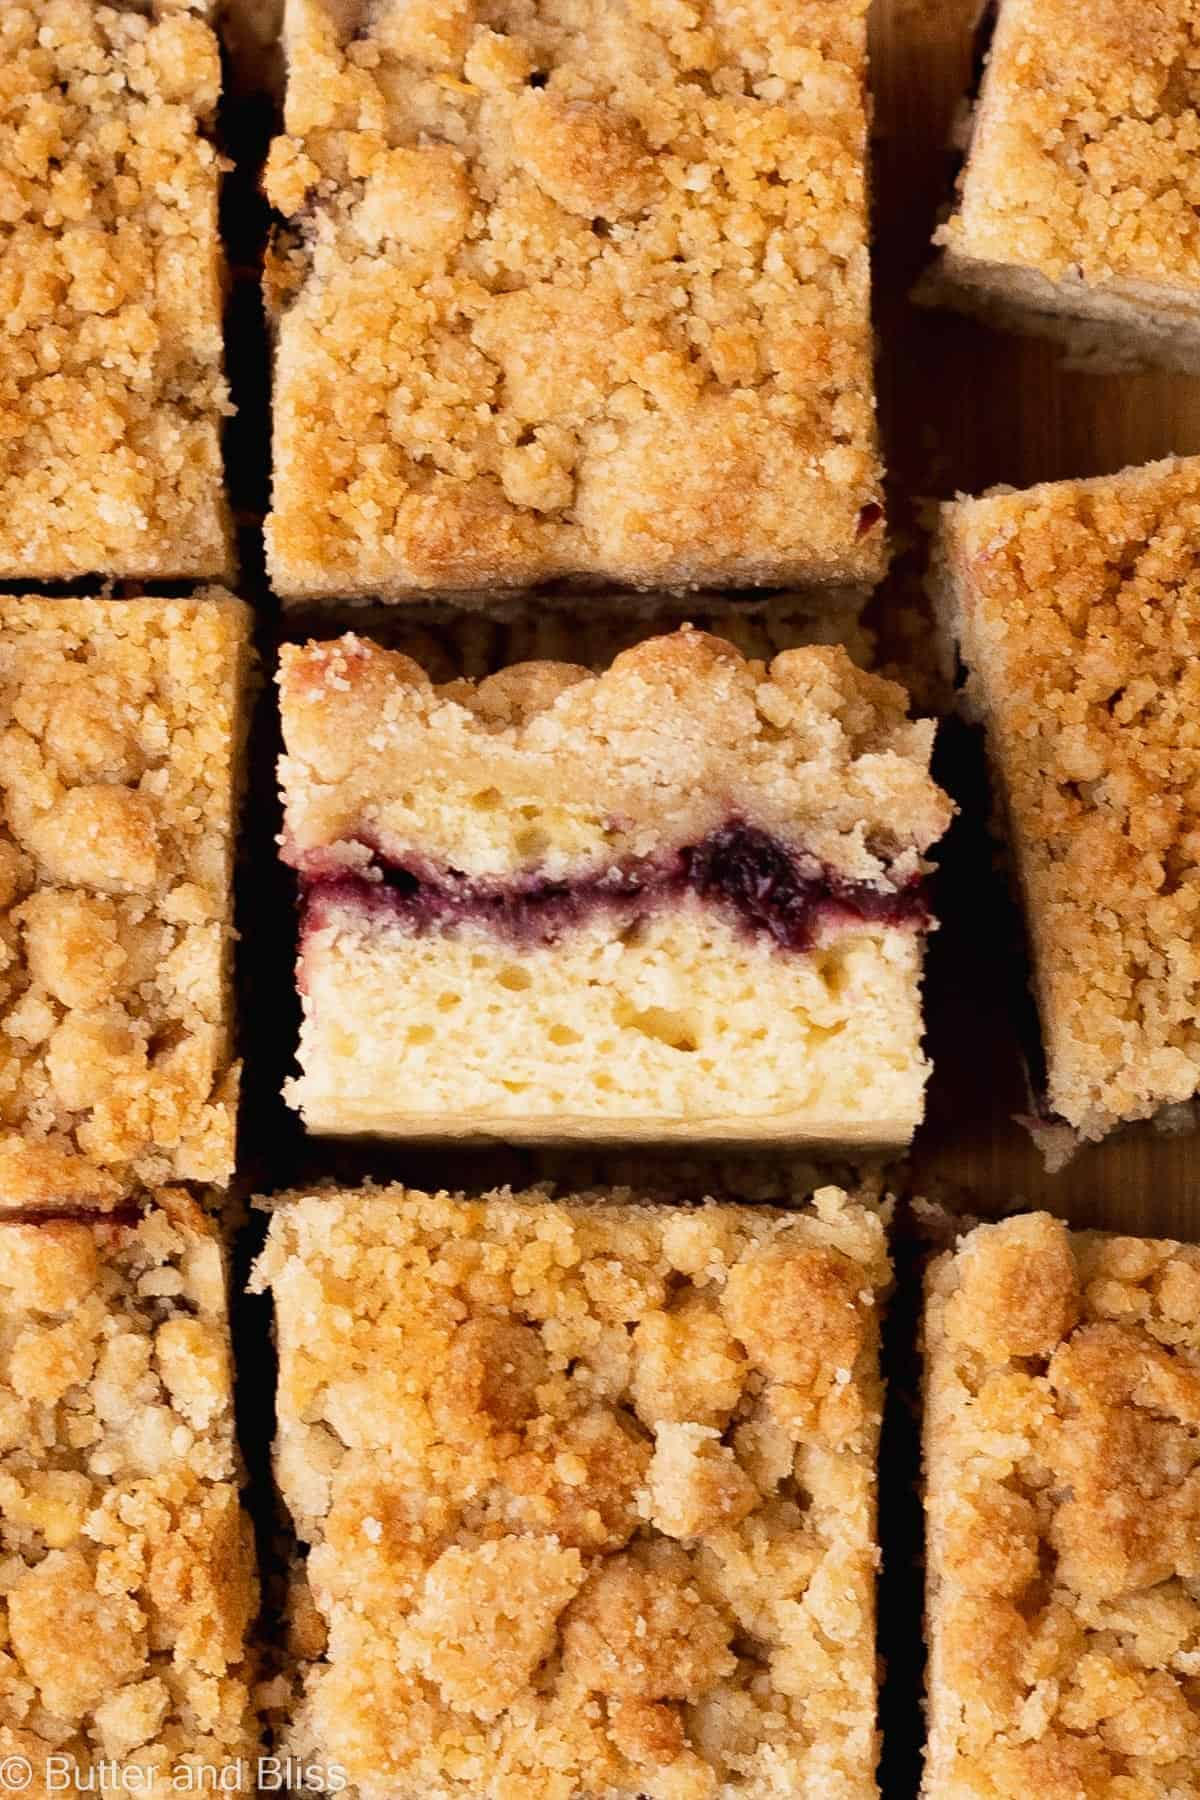 Top view of a slice of a bakewell cherry crumb cake